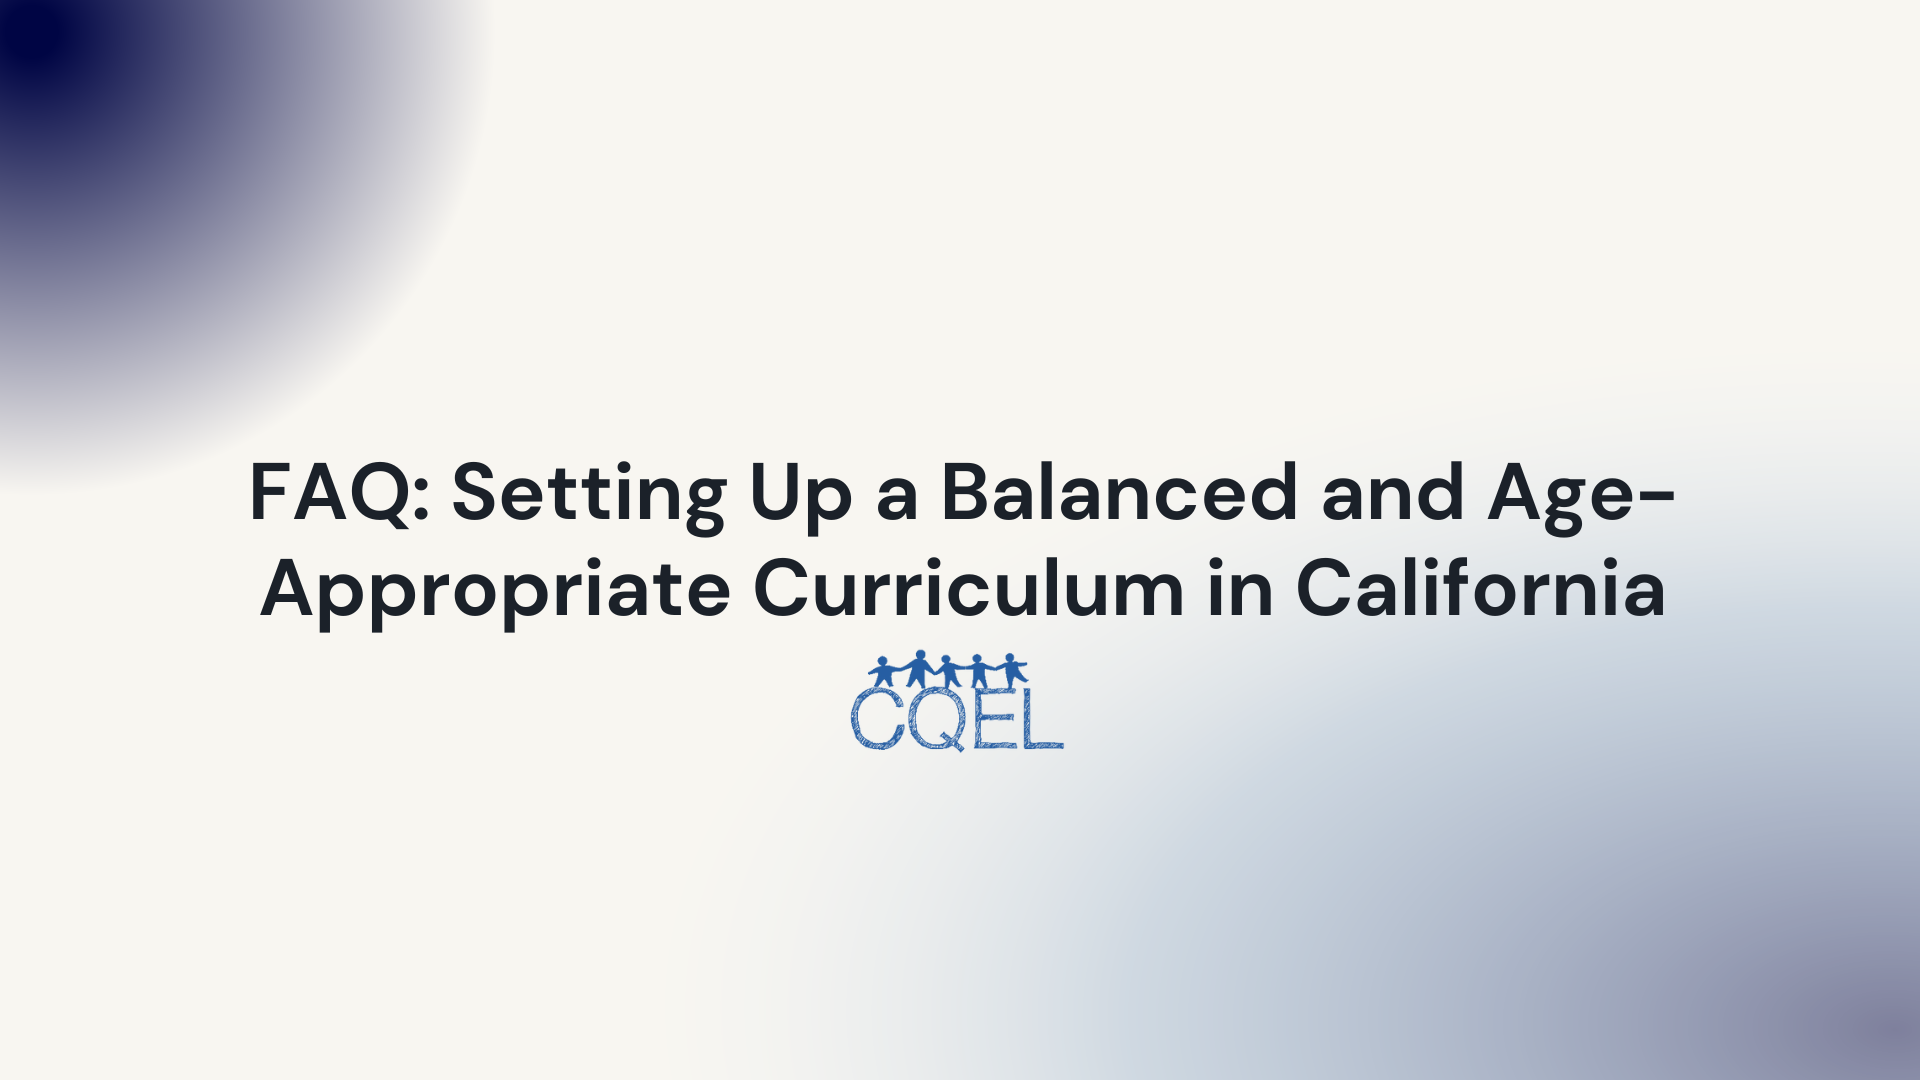 FAQ: Setting Up a Balanced and Age-Appropriate Curriculum in California